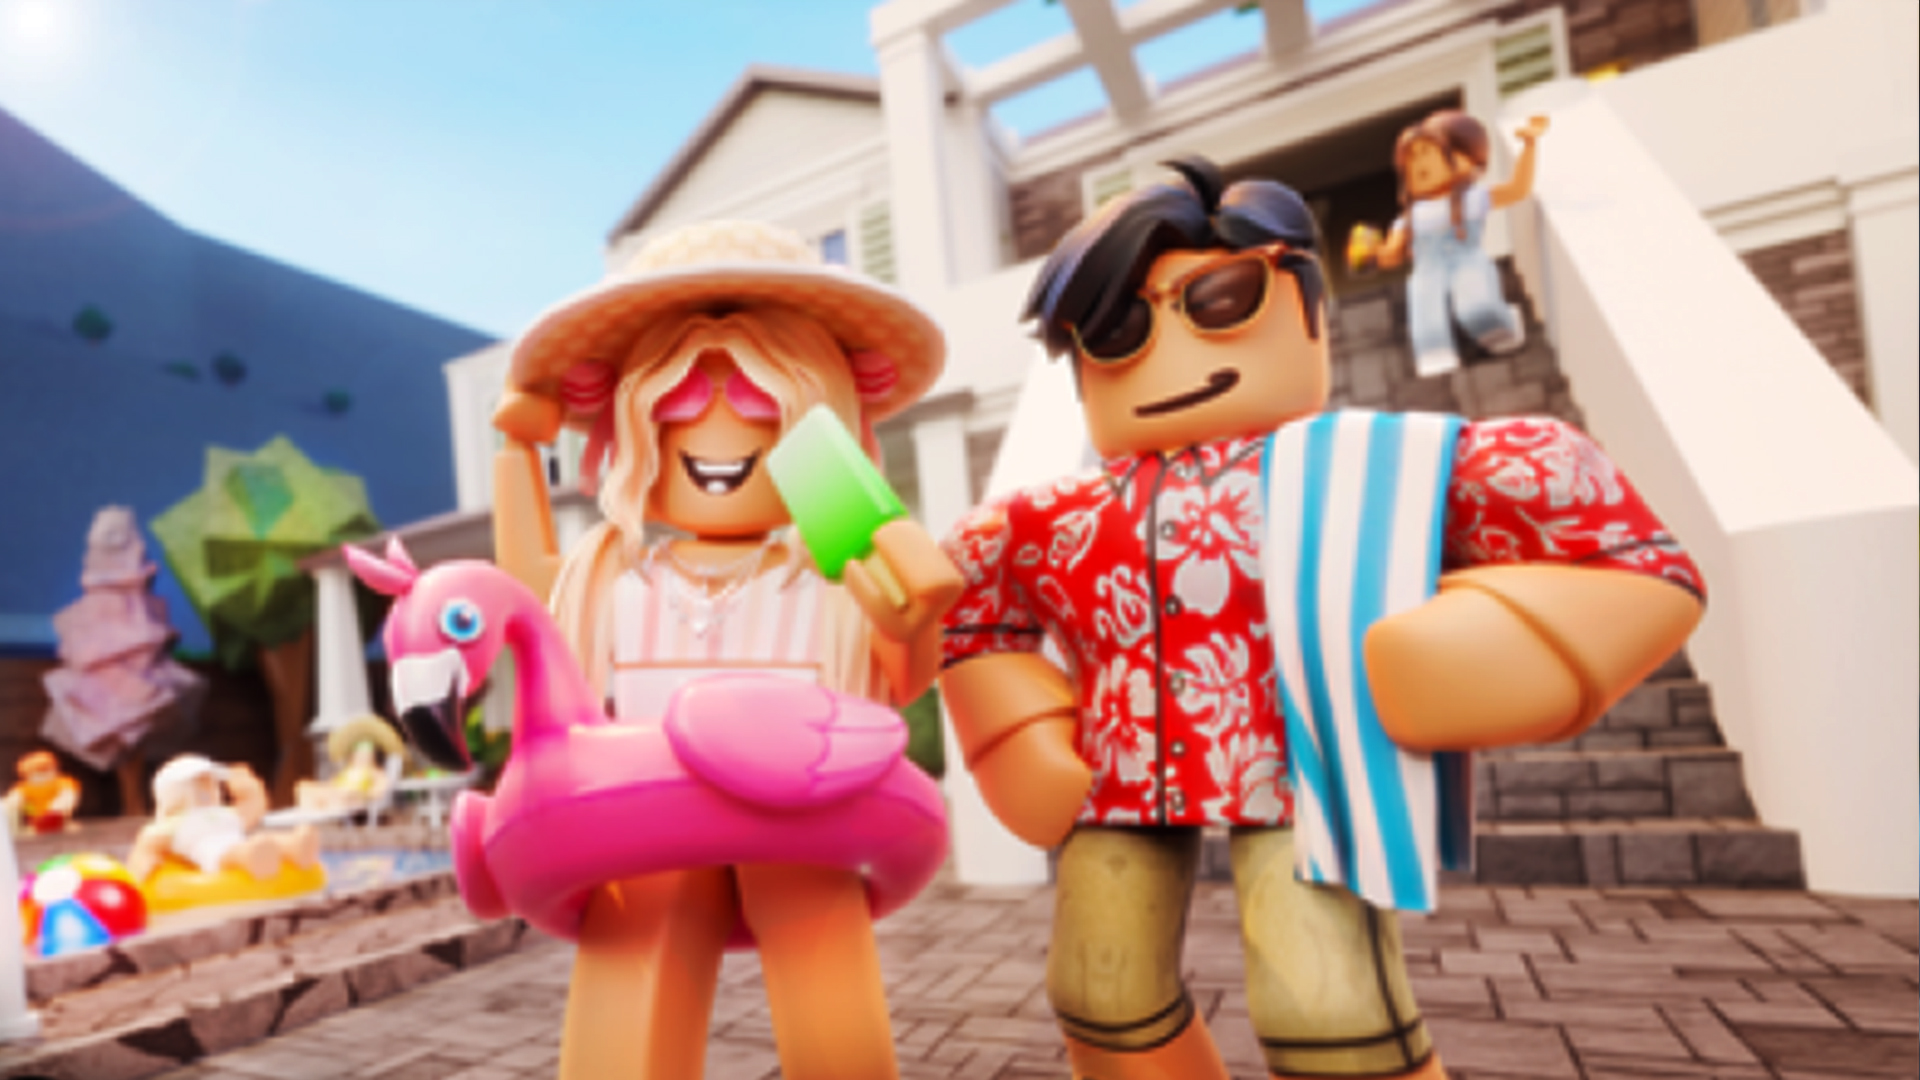 Roblox Innovation Awards will happen in-person on September 10